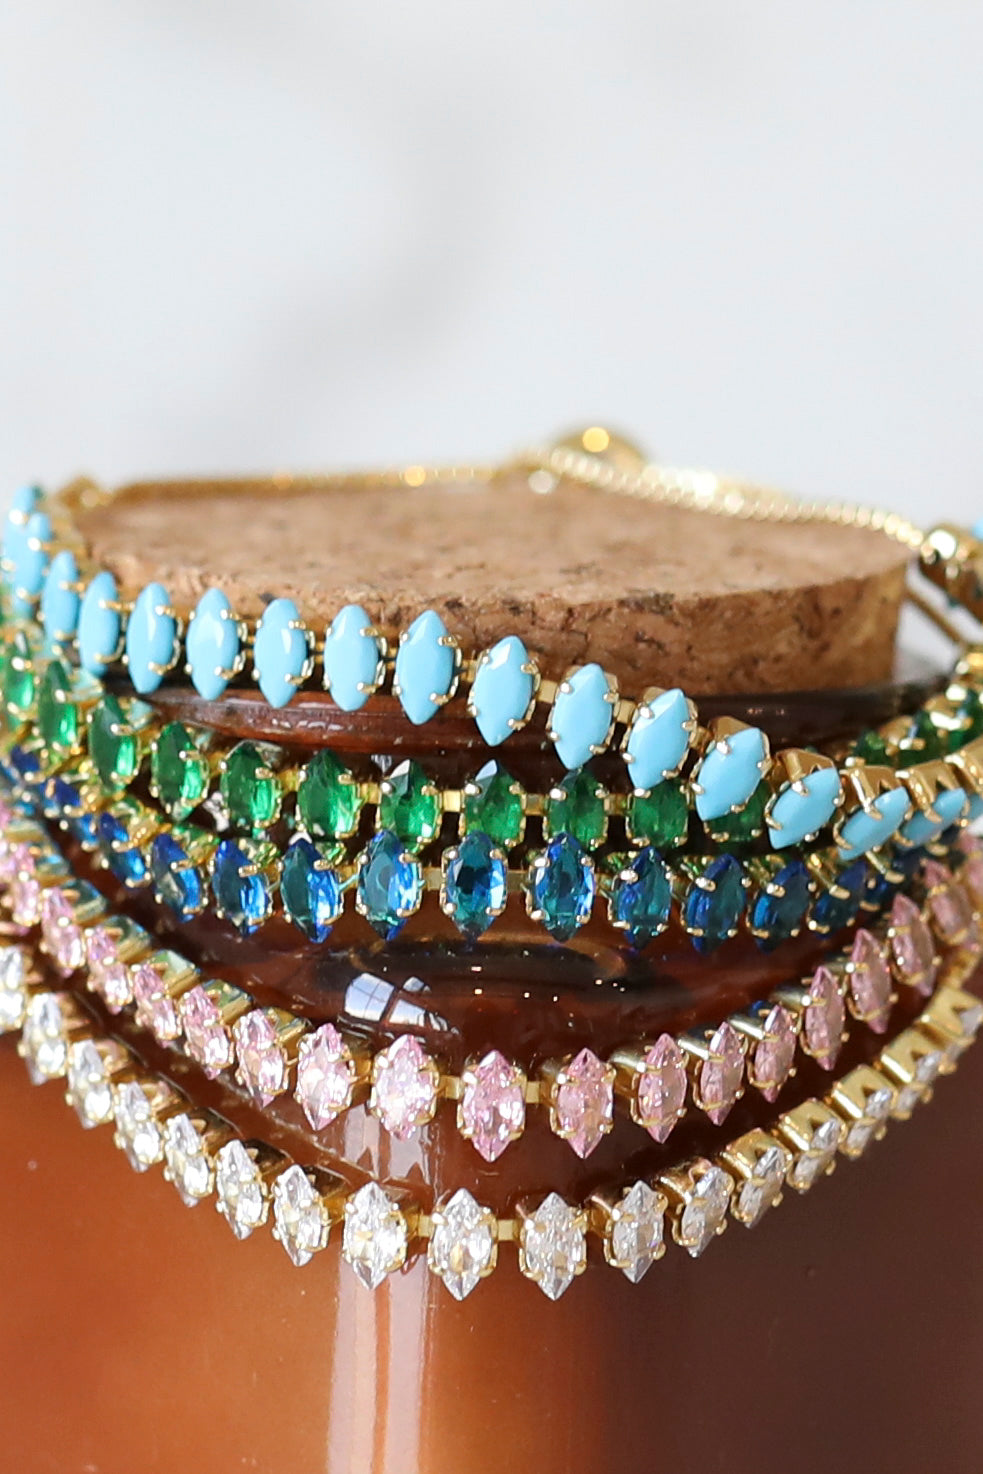 CZ Crystal Slide Bracelet available in a variety of colors